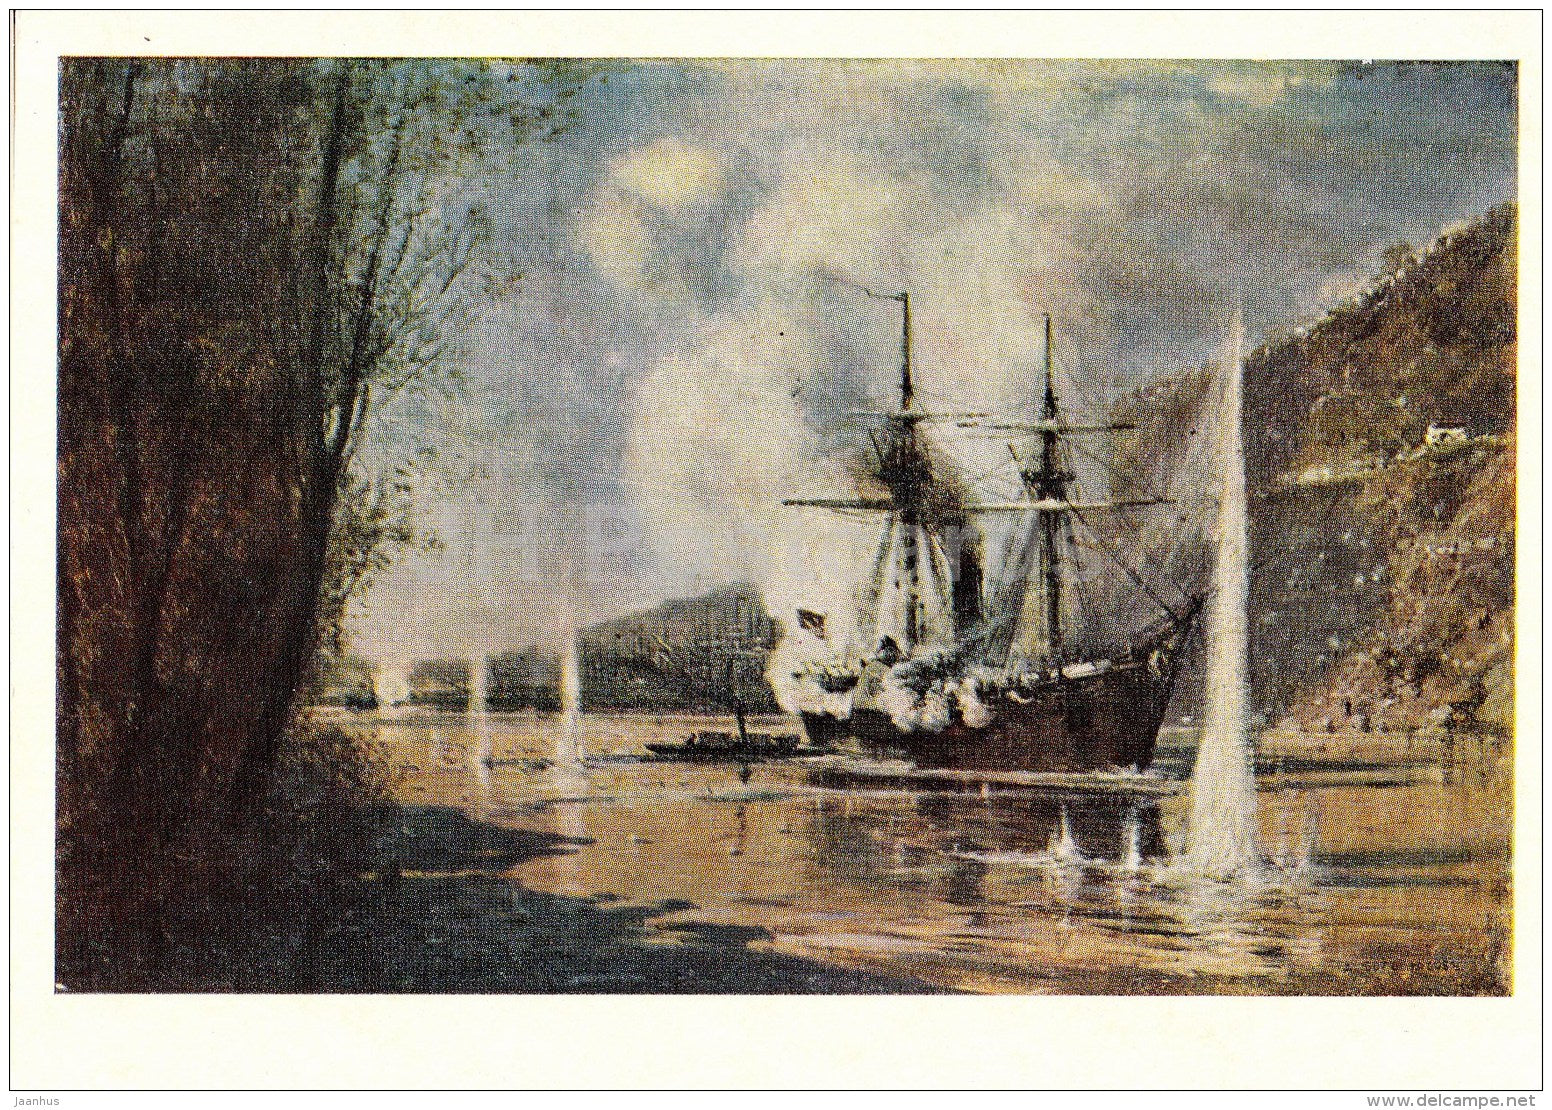 painting by A. Bogolyubov - Attack Turkish ship , 1877 - Russian Art - 1974 - Russia USSR - unused - JH Postcards